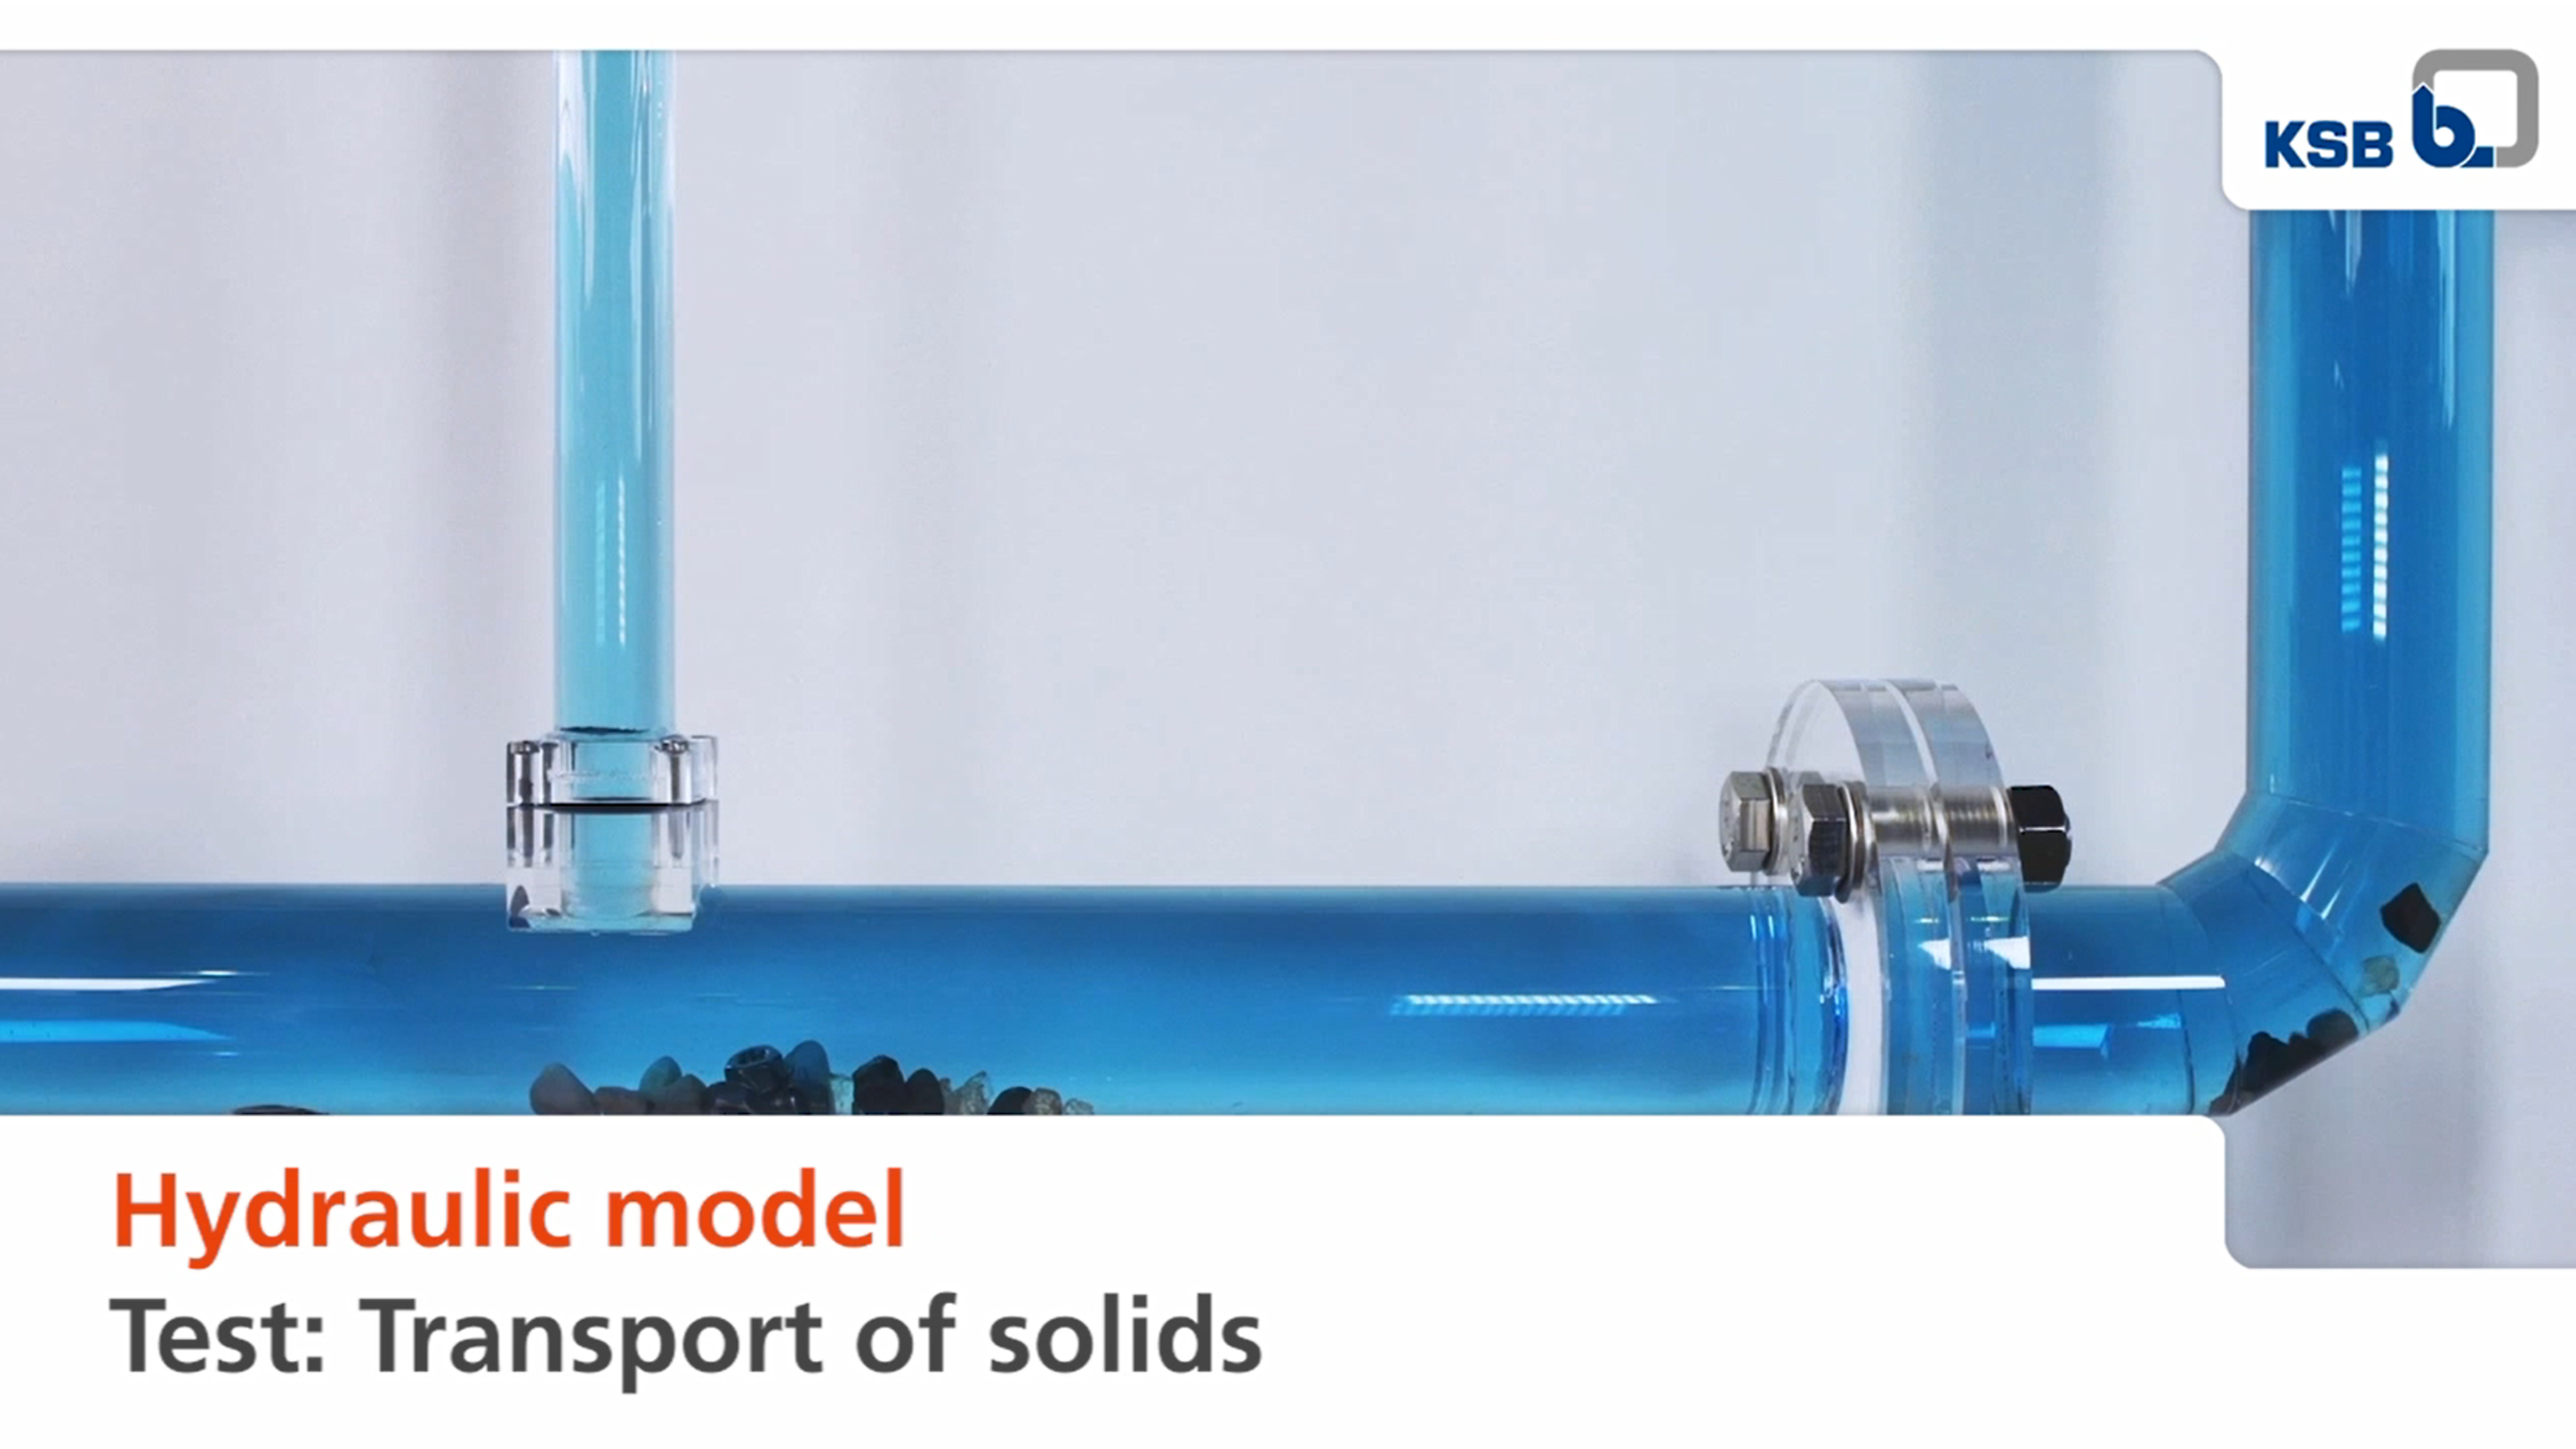 Hydraulic model testing: Solids transport in waste water pipes